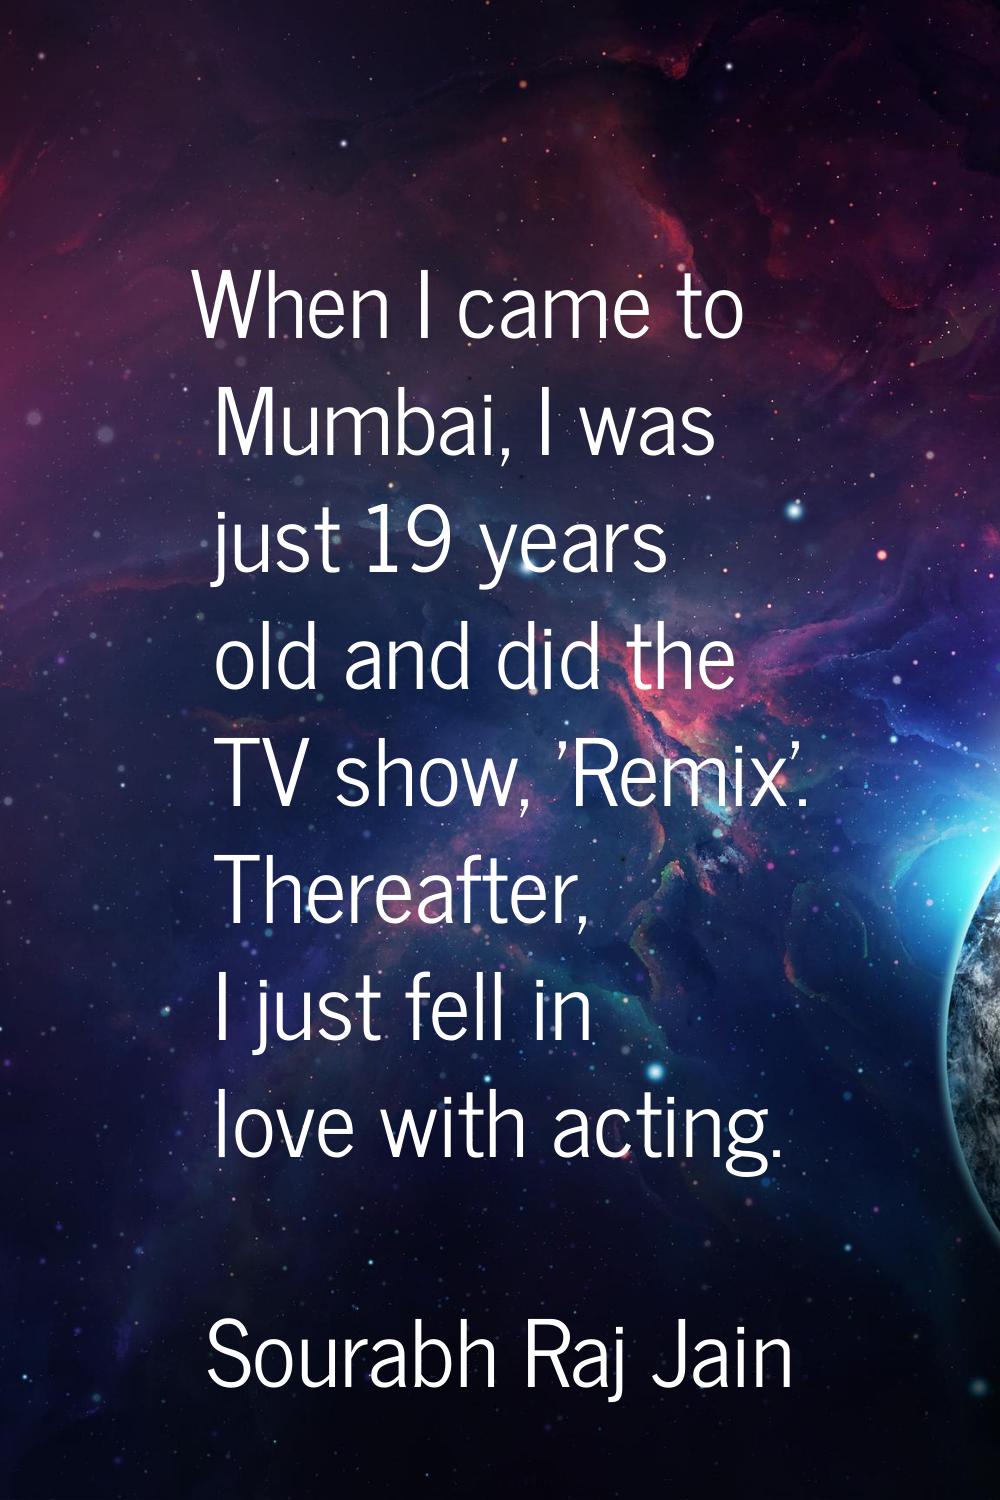 When I came to Mumbai, I was just 19 years old and did the TV show, 'Remix'. Thereafter, I just fel